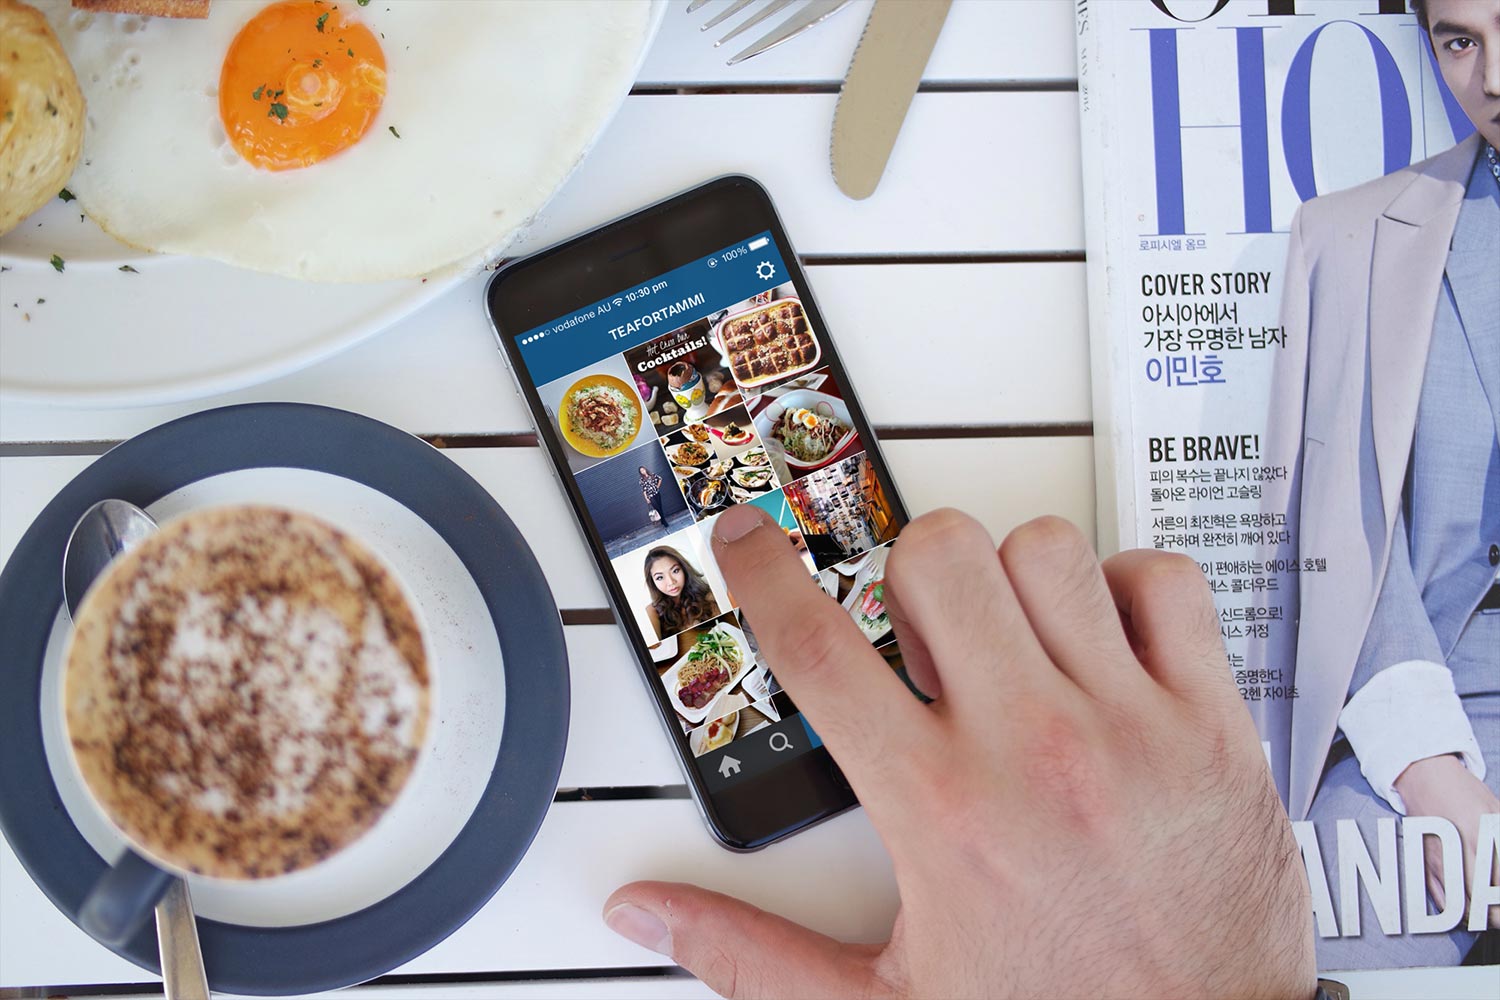 a phone on the table with the instagram screen up, surrounded by coffee and breakfast